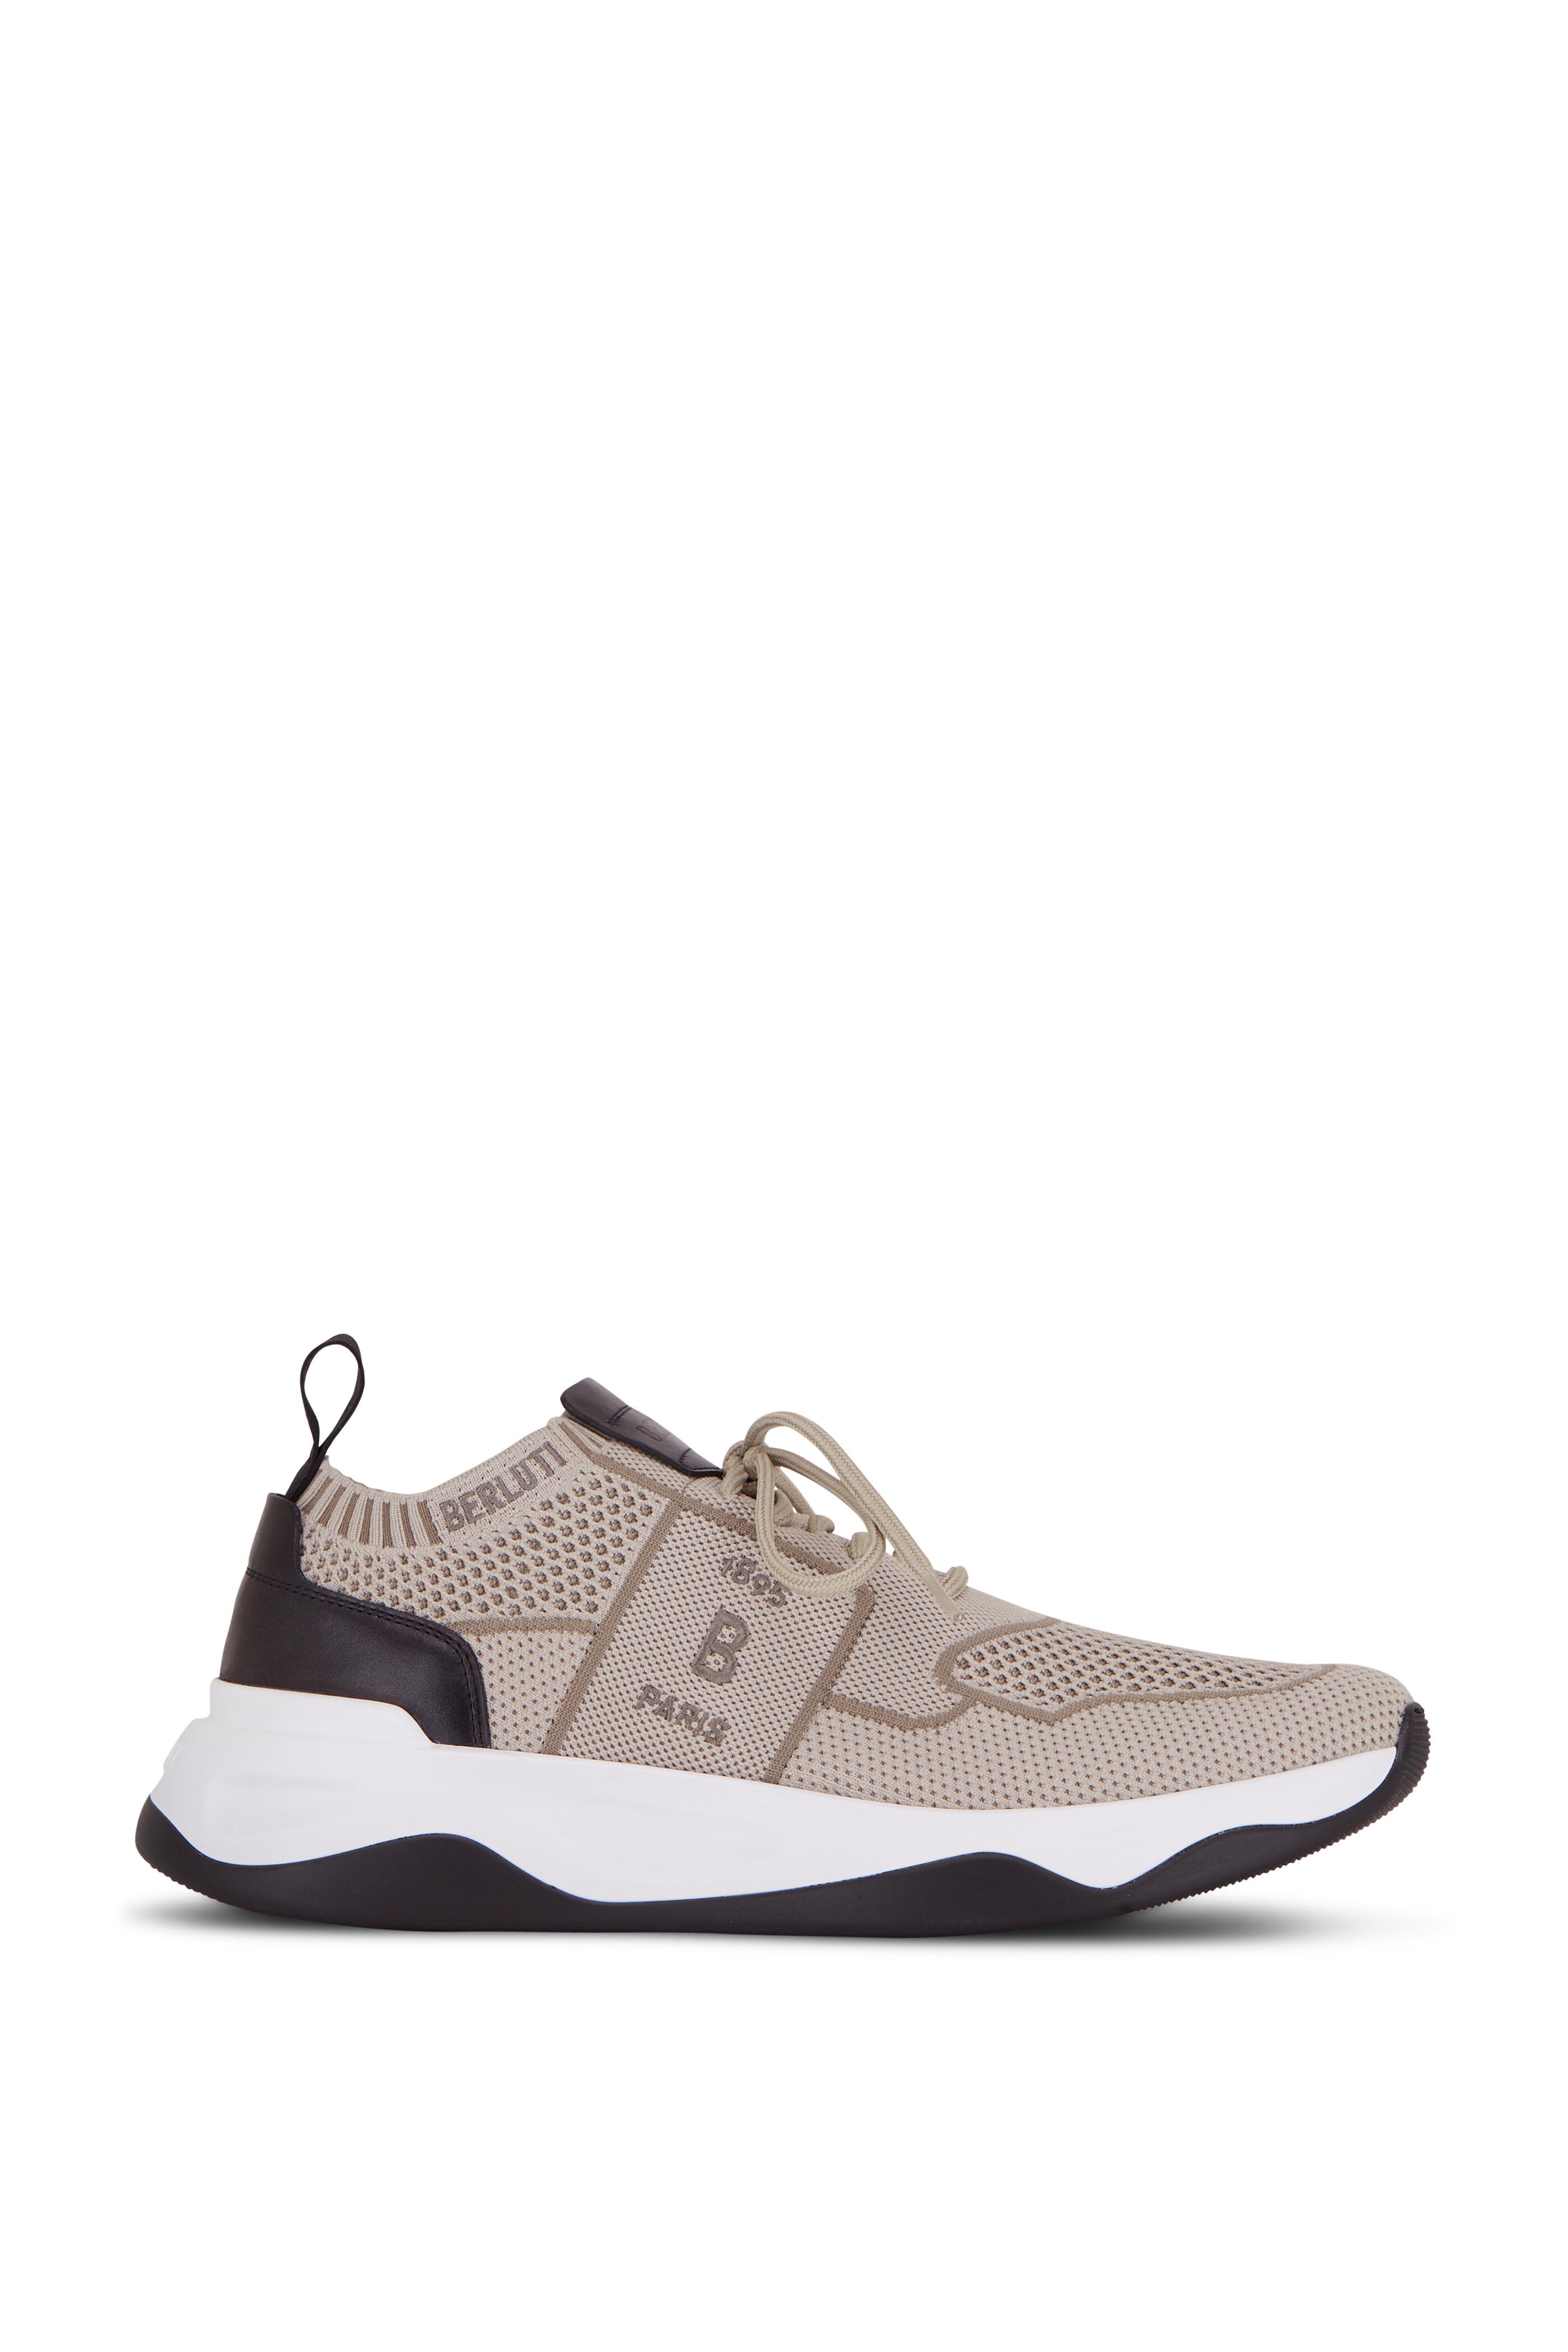 Berluti Men's Shadow Sand Knit Sneaker | 9 M by Mitchell Stores